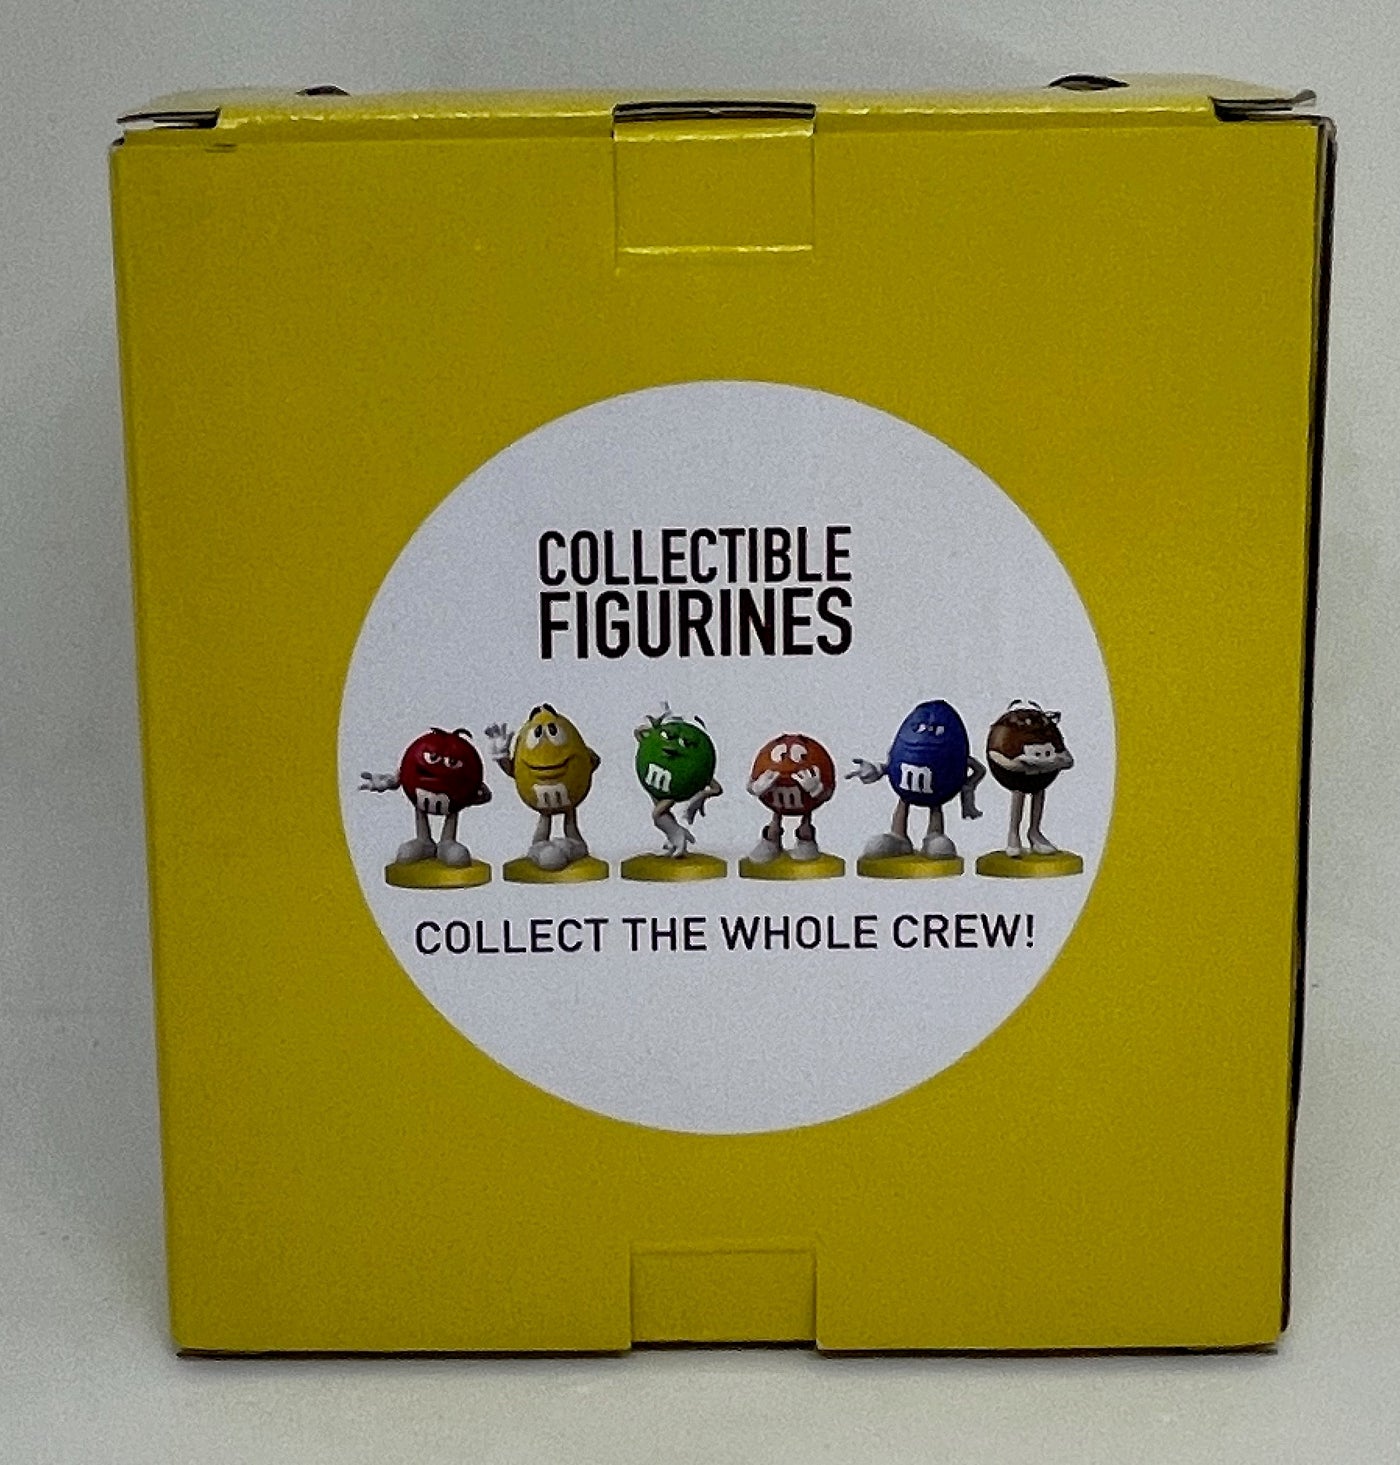 M&M's World Yellow Collectible Figurine New With Box